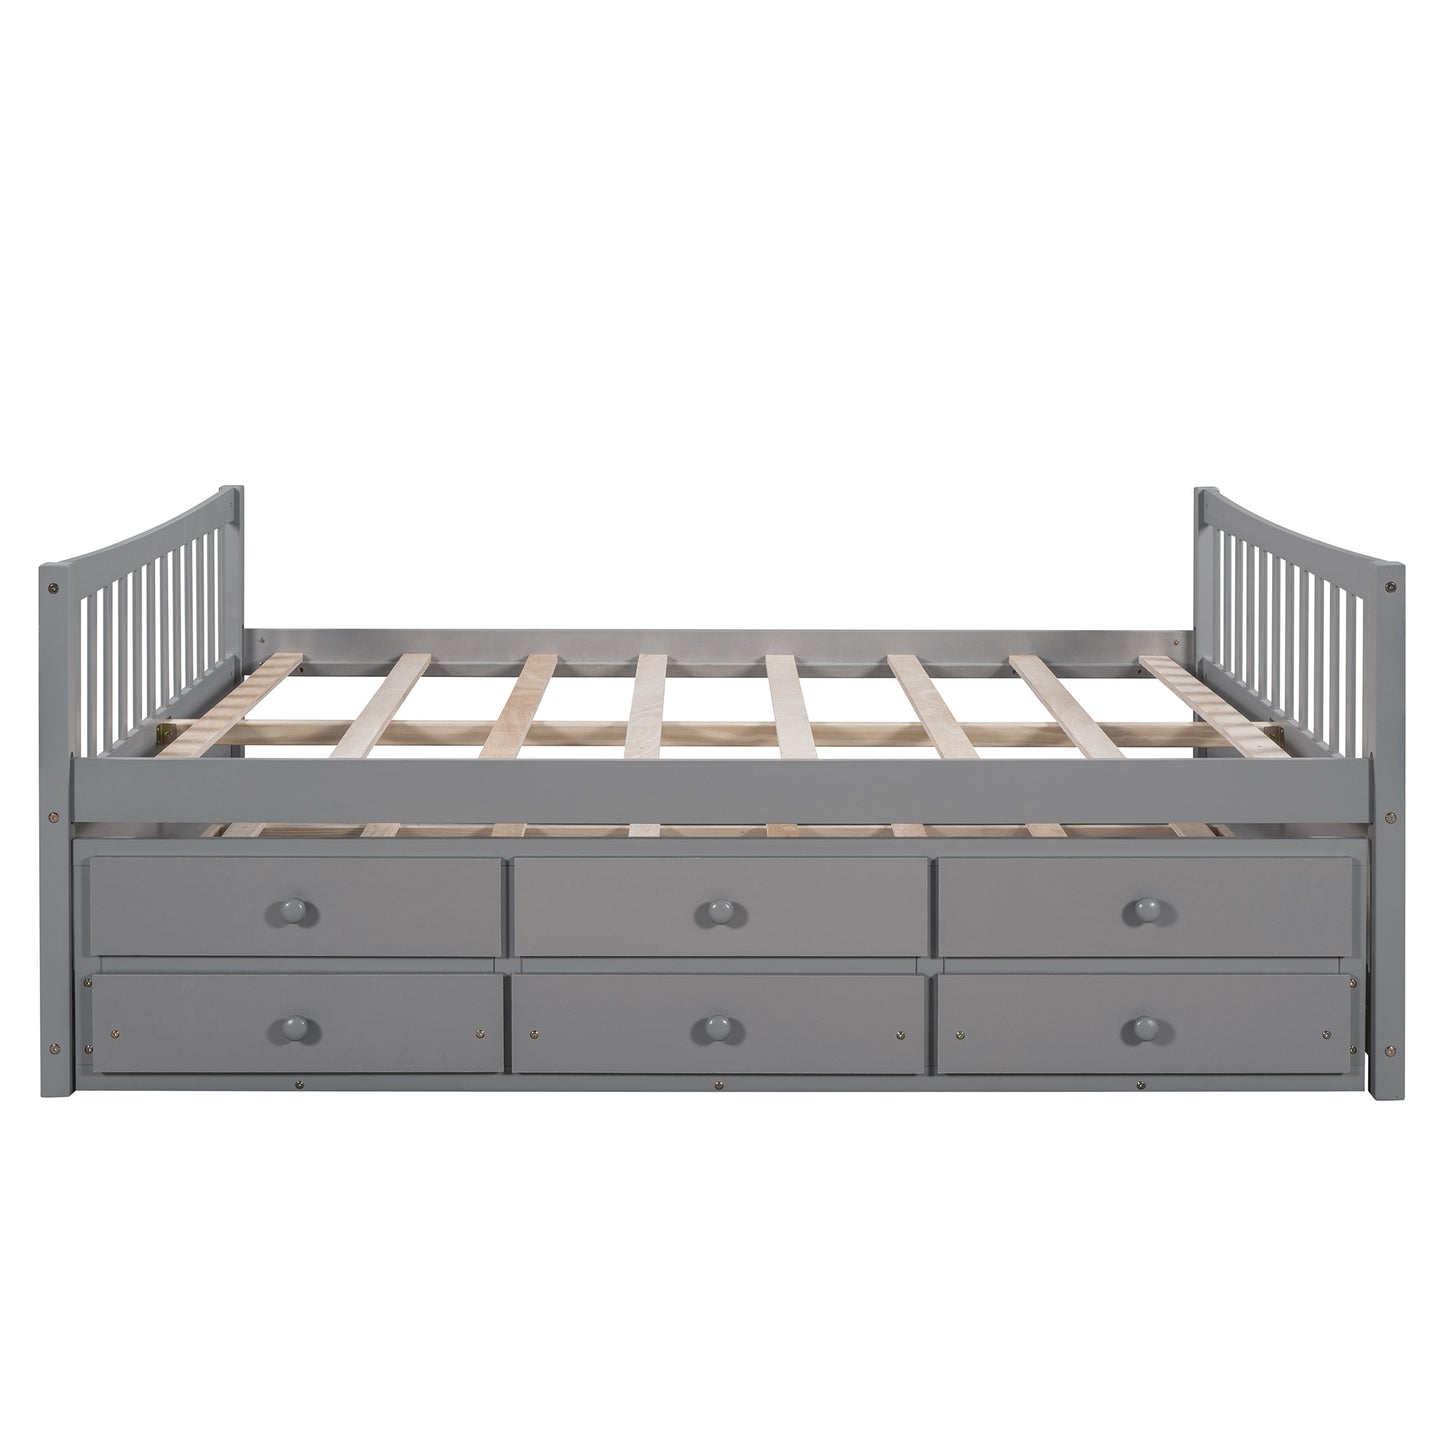 Full size Daybed with Twin size Trundle and Drawers, Full Size, Gray